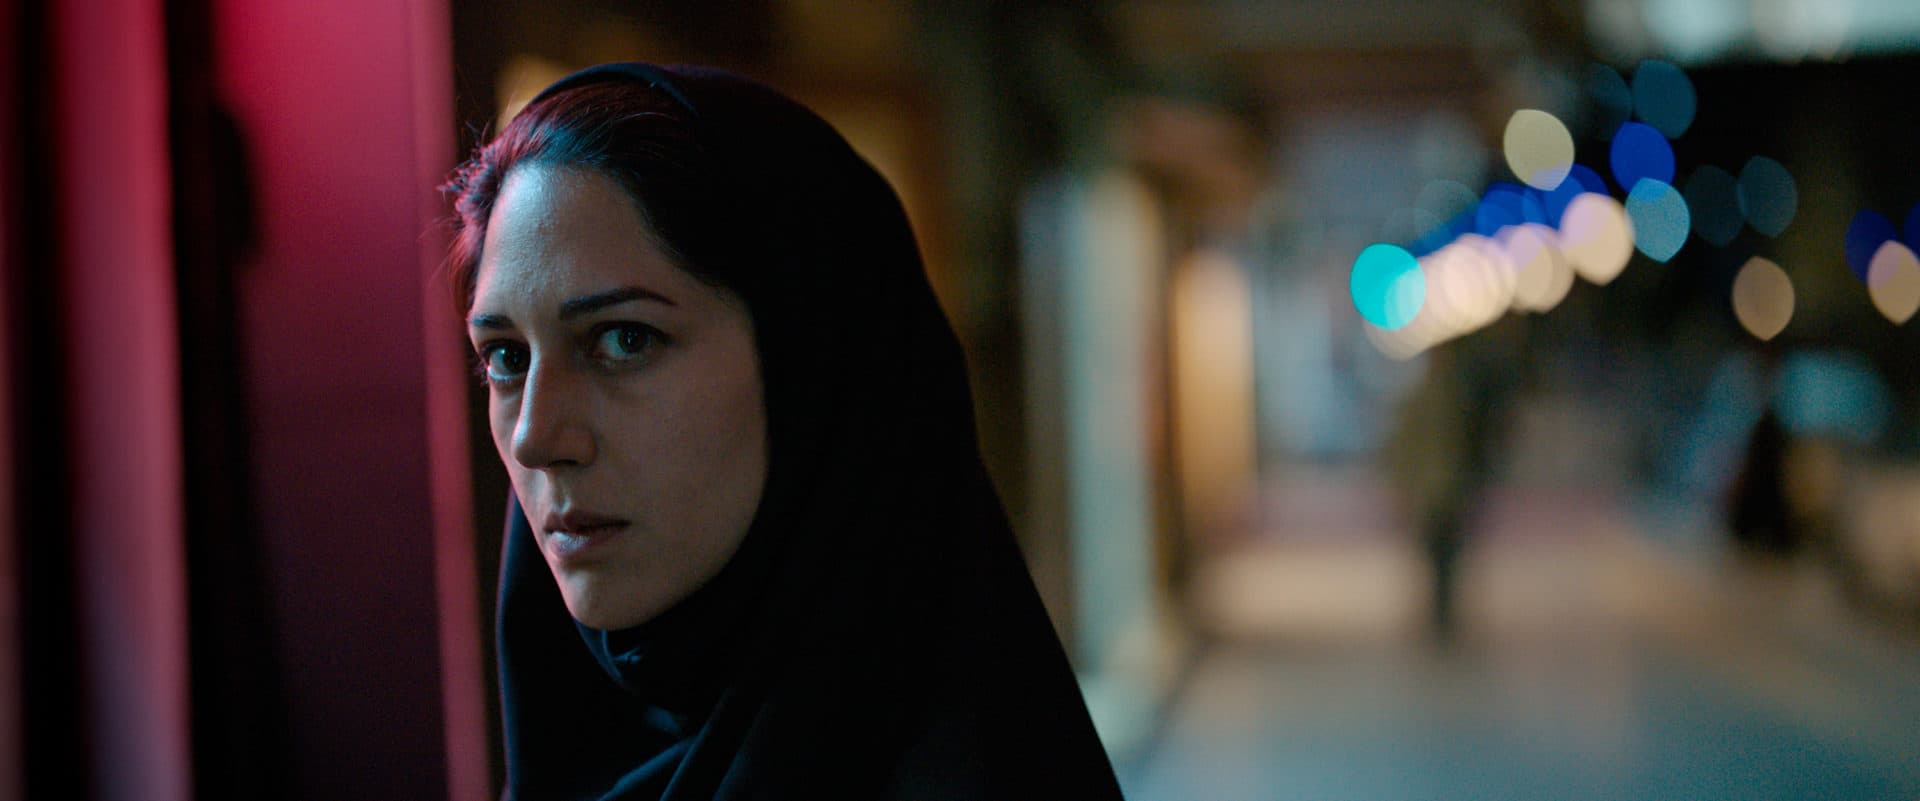 Zar Amir Ebrahimi won Best Actress at this year’s Cannes Film Festival for her performance in 